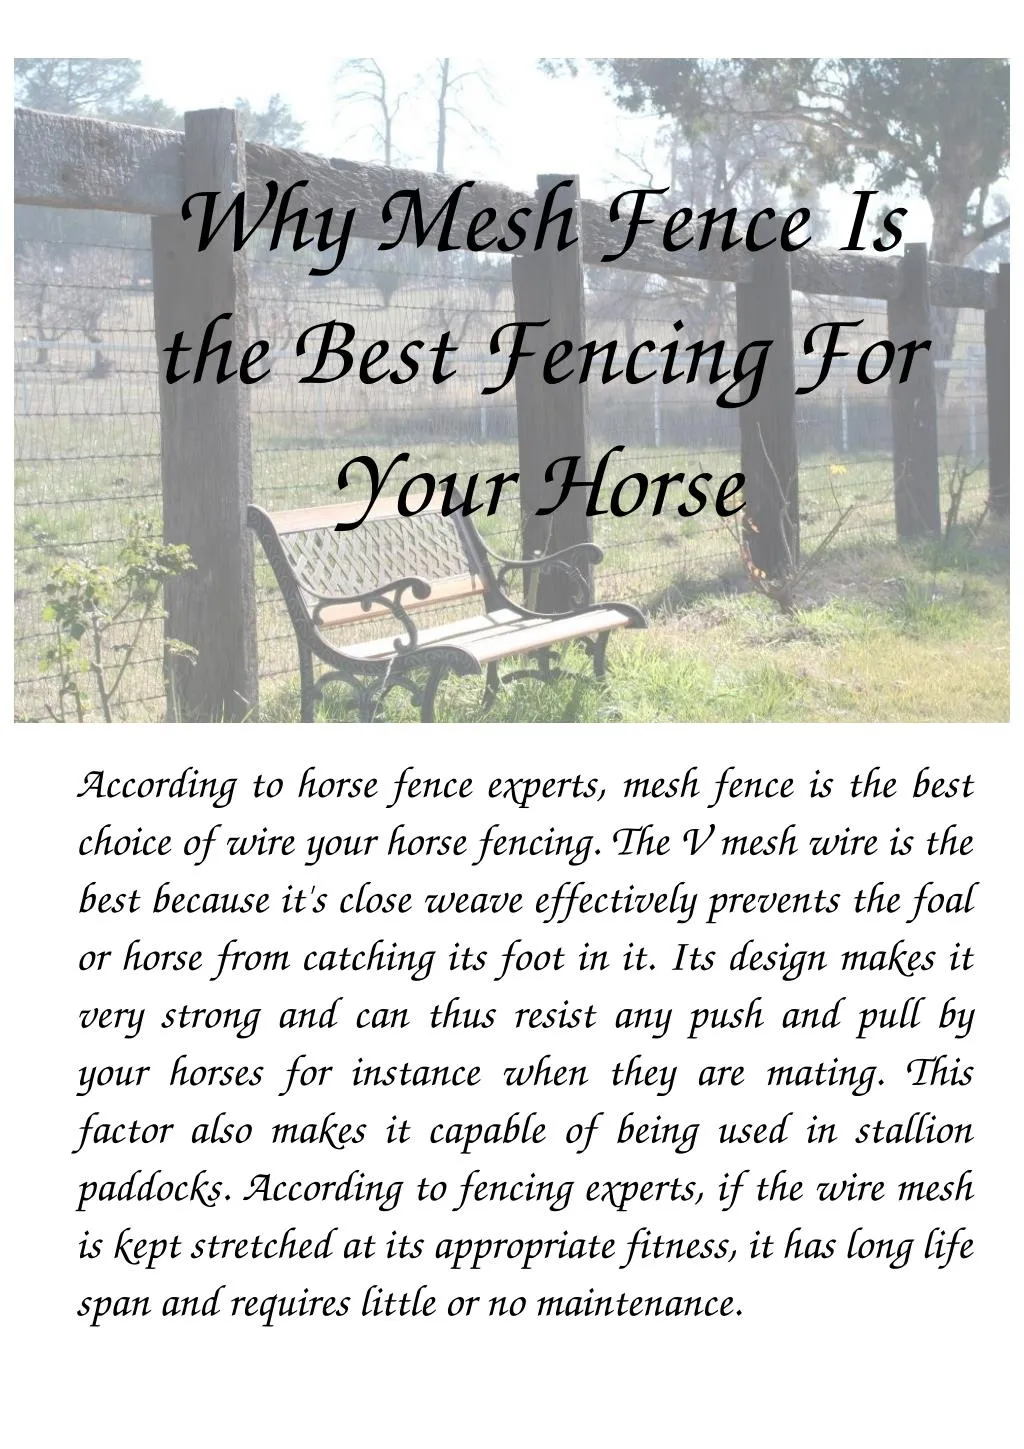 why mesh fence is the best fencing for your horse